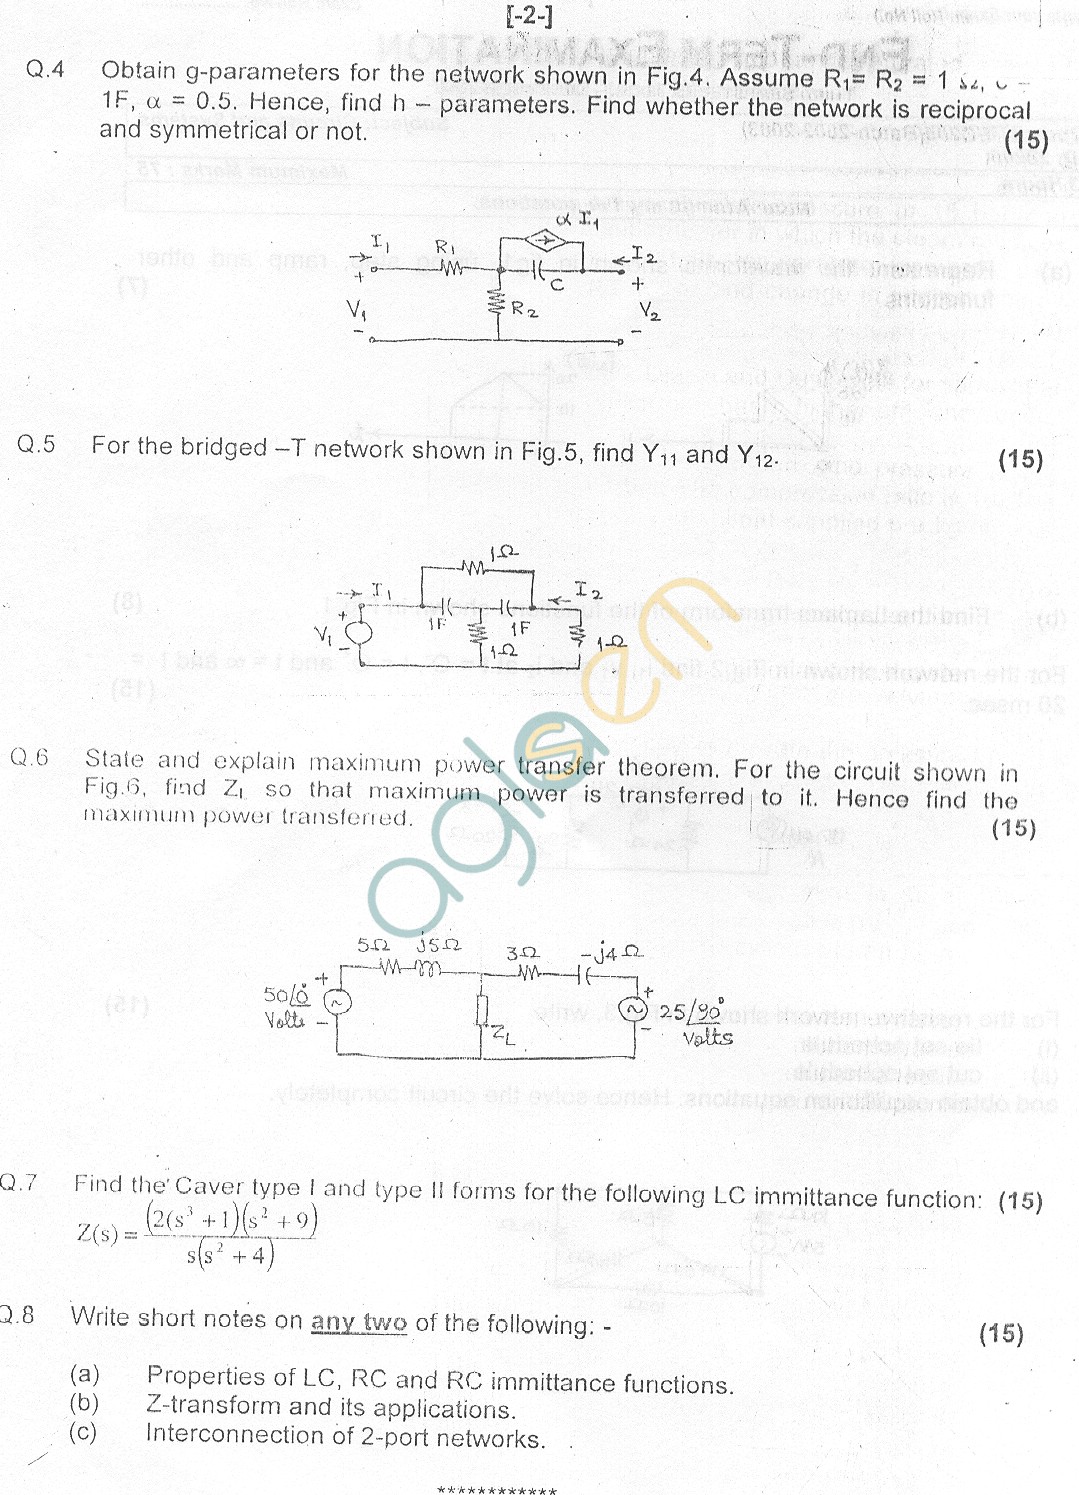 GGSIPU Question Papers Third Semester – End Term 2007 – ETEC-205